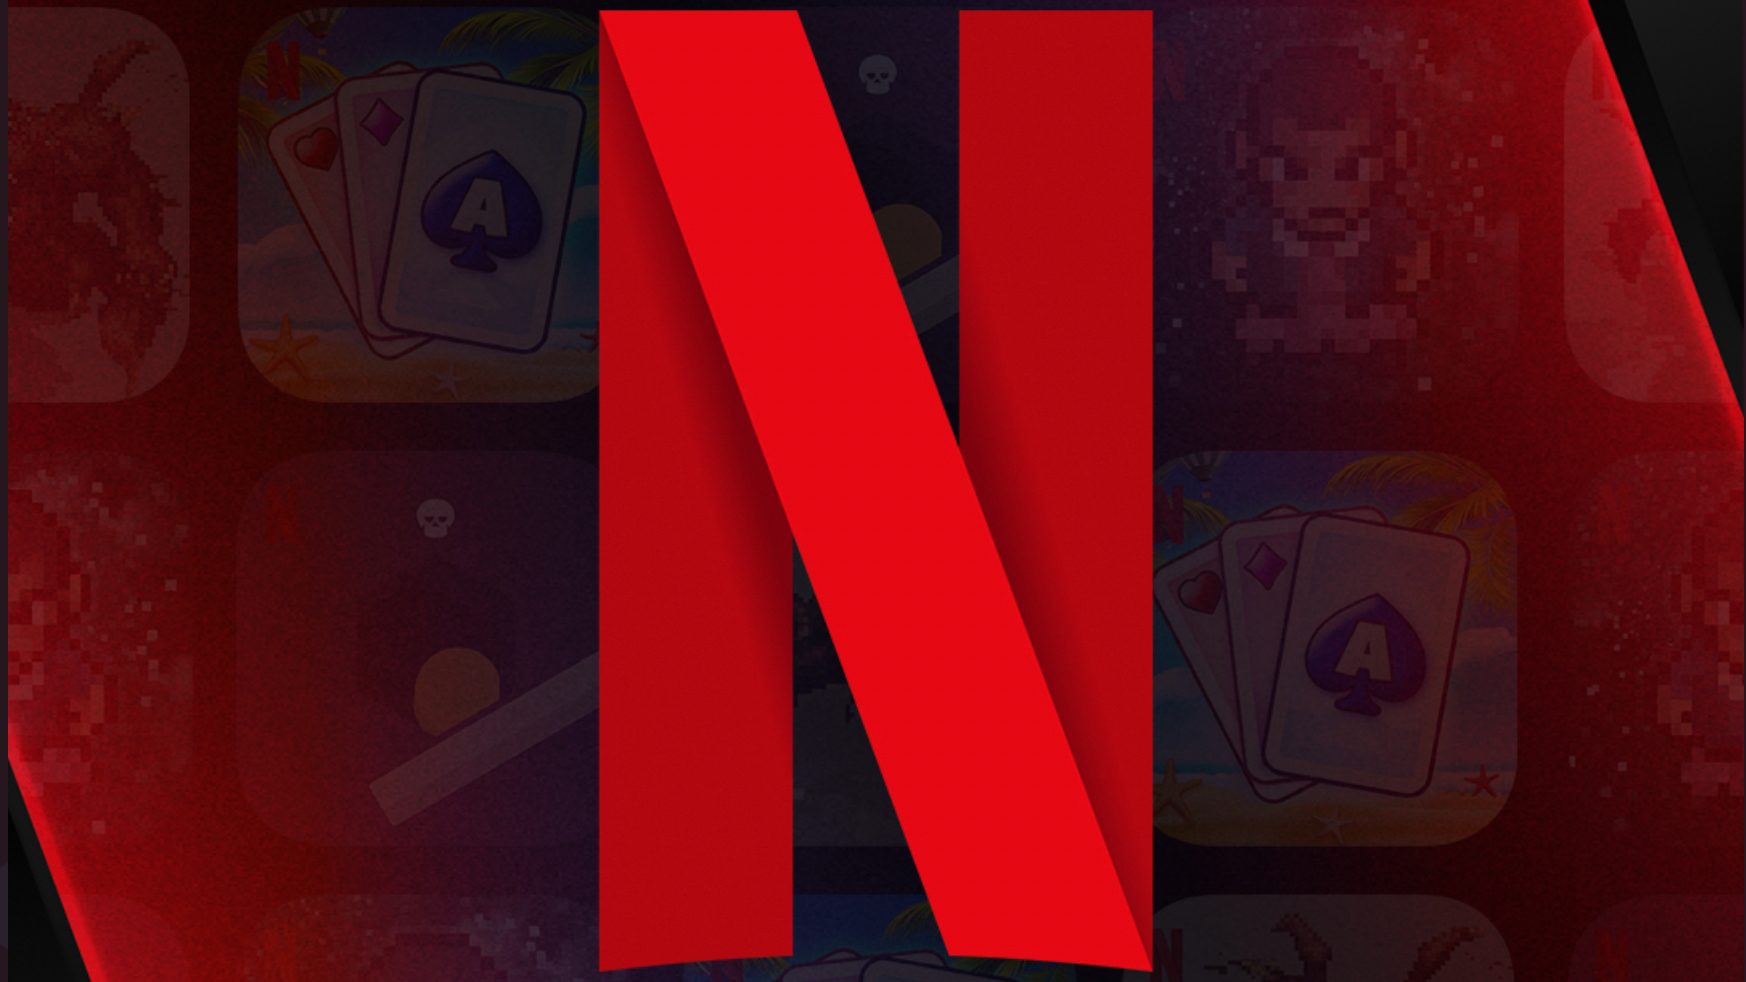 Netflix Partners With boAt to Create an Immersive Streaming Experience -  About Netflix